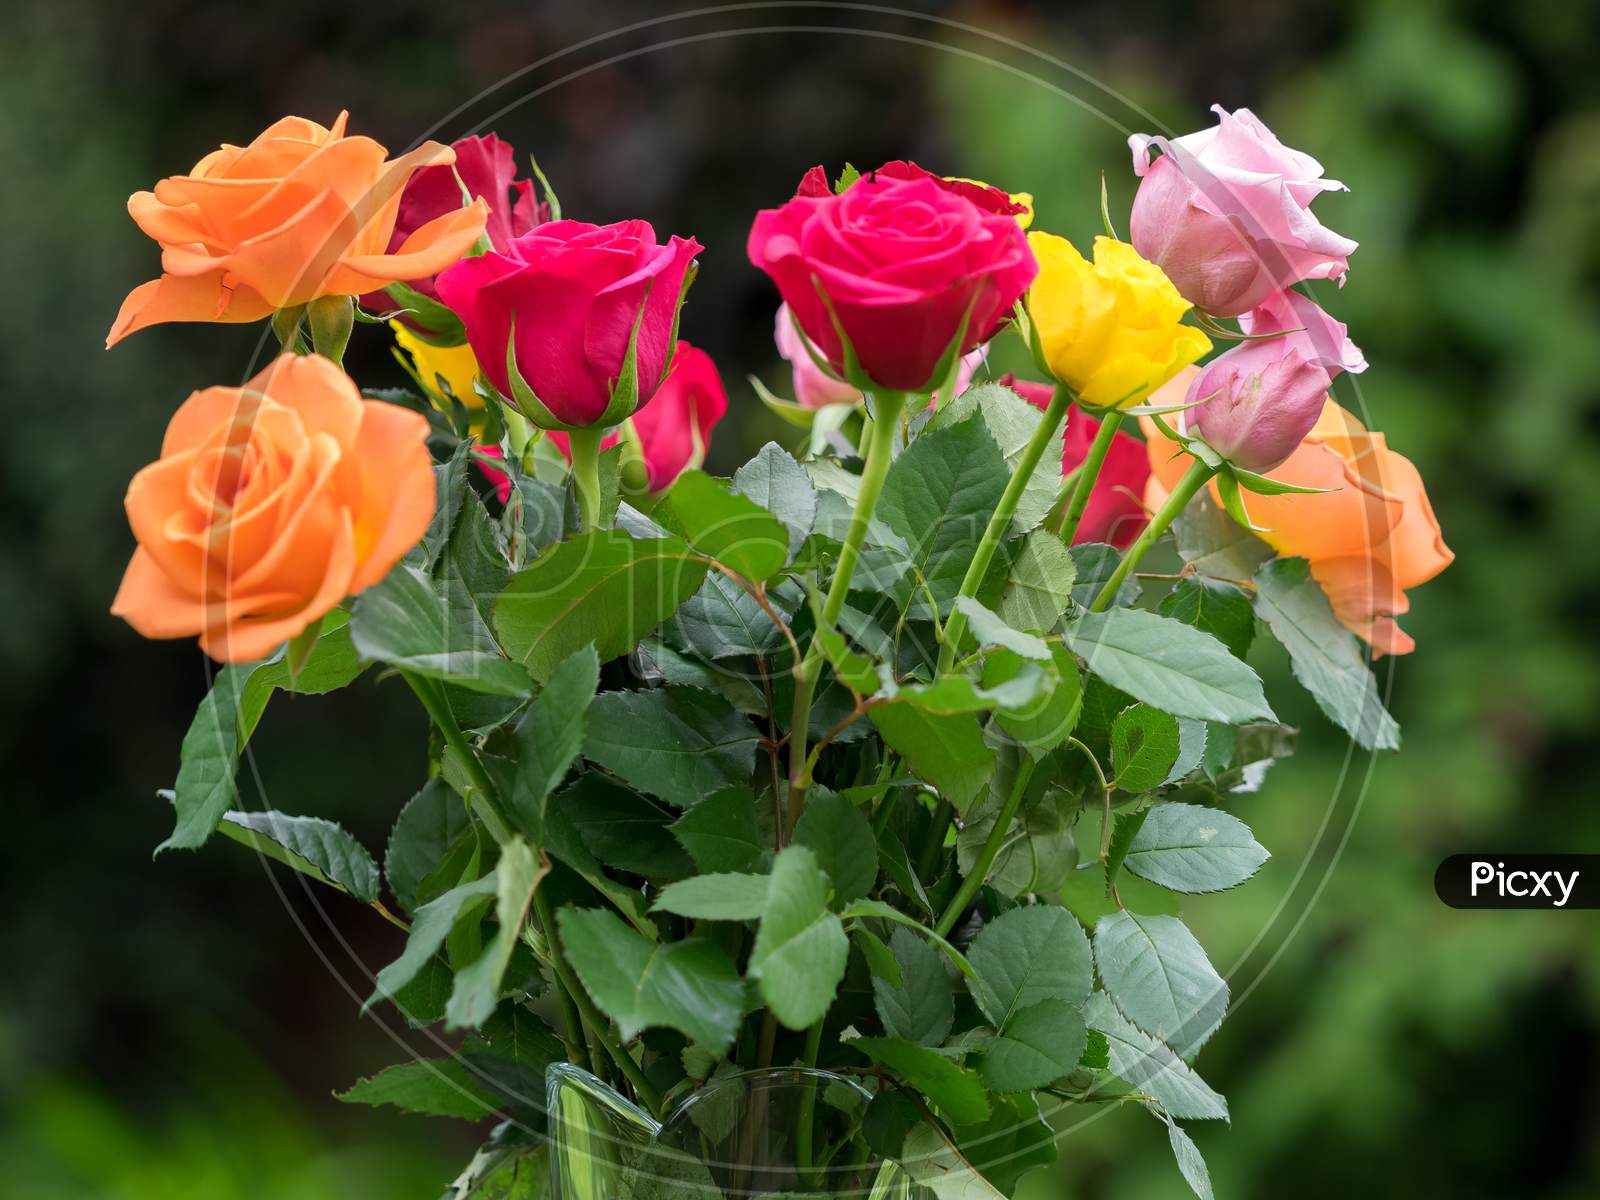 colourful pictures of roses